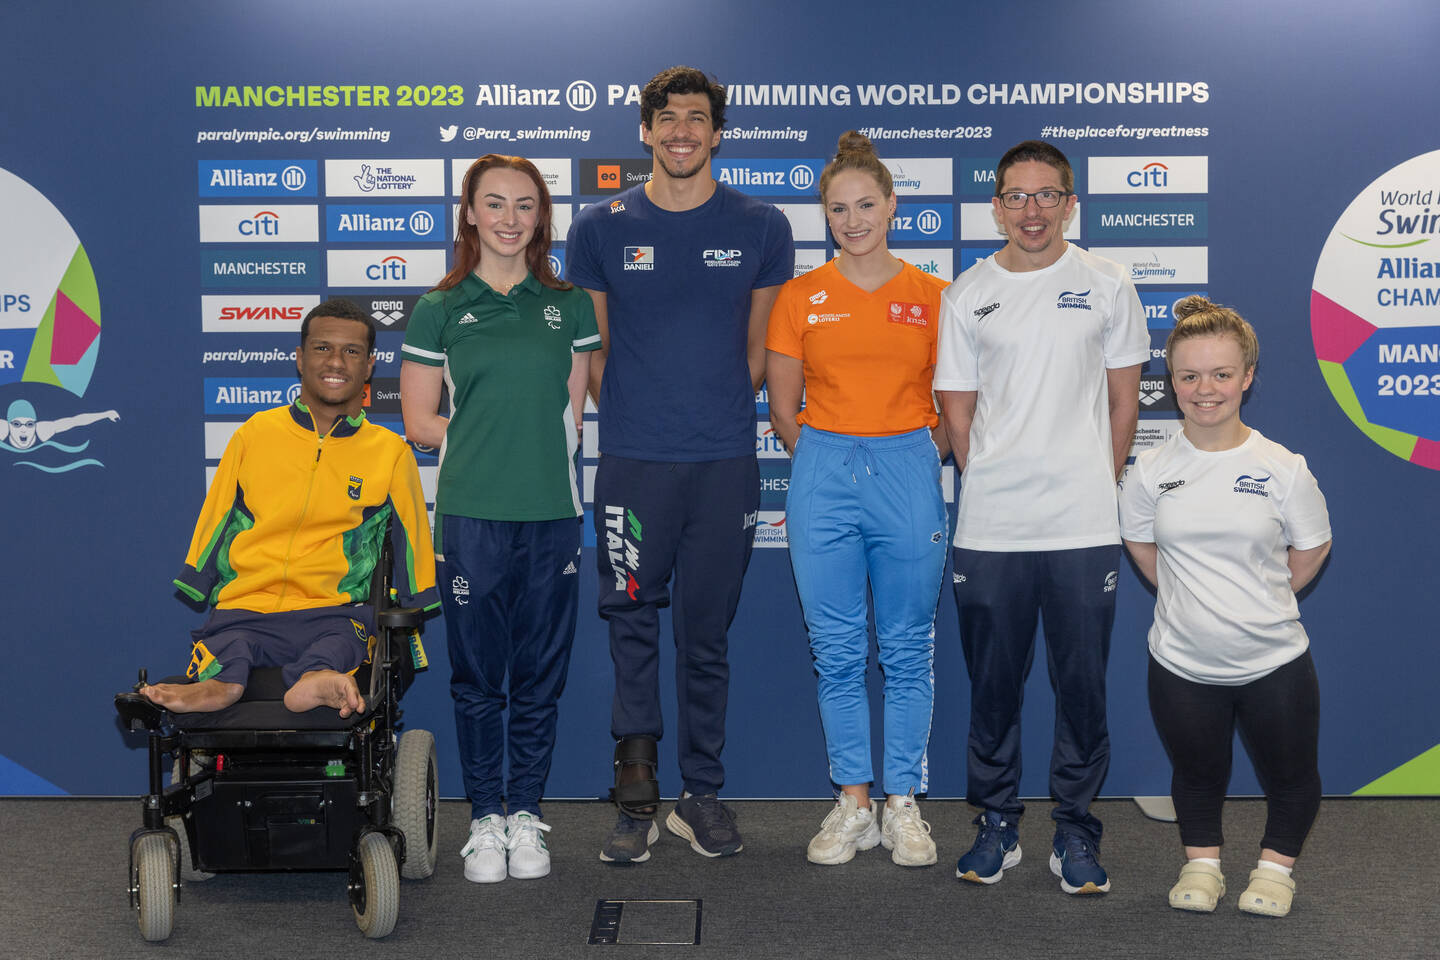 Six swimmers in tracksuits line up in front of a branded Manchester 2023 Allianz Para Swimming World Championships board.

Photo credit:Sam Mellish / Manchester 2023 Allianz Para Swimming World Championships 